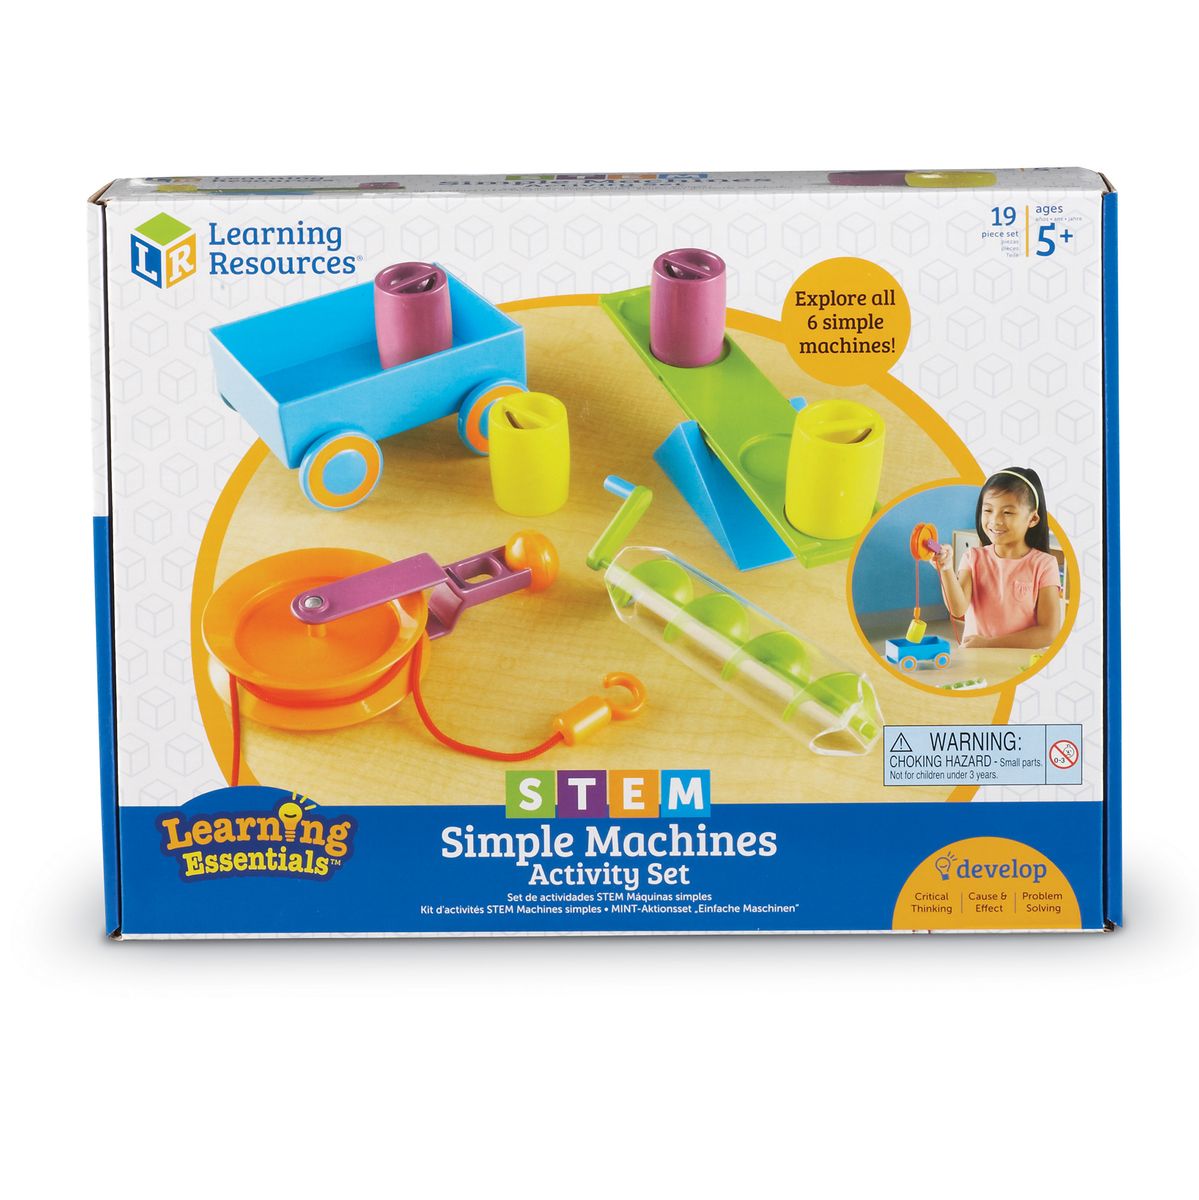 [RDY] [送料無料] Learning Resources STEM Simple Machines Activity Set -19 pieces, Boys Girls Ages 5 6 7+ Hands-on Science Activities, STEM Toys [楽天海外通販] | Learning Resources STEM Simple Machines Activity Set -19 Pieces, Boys Girls Ages 5